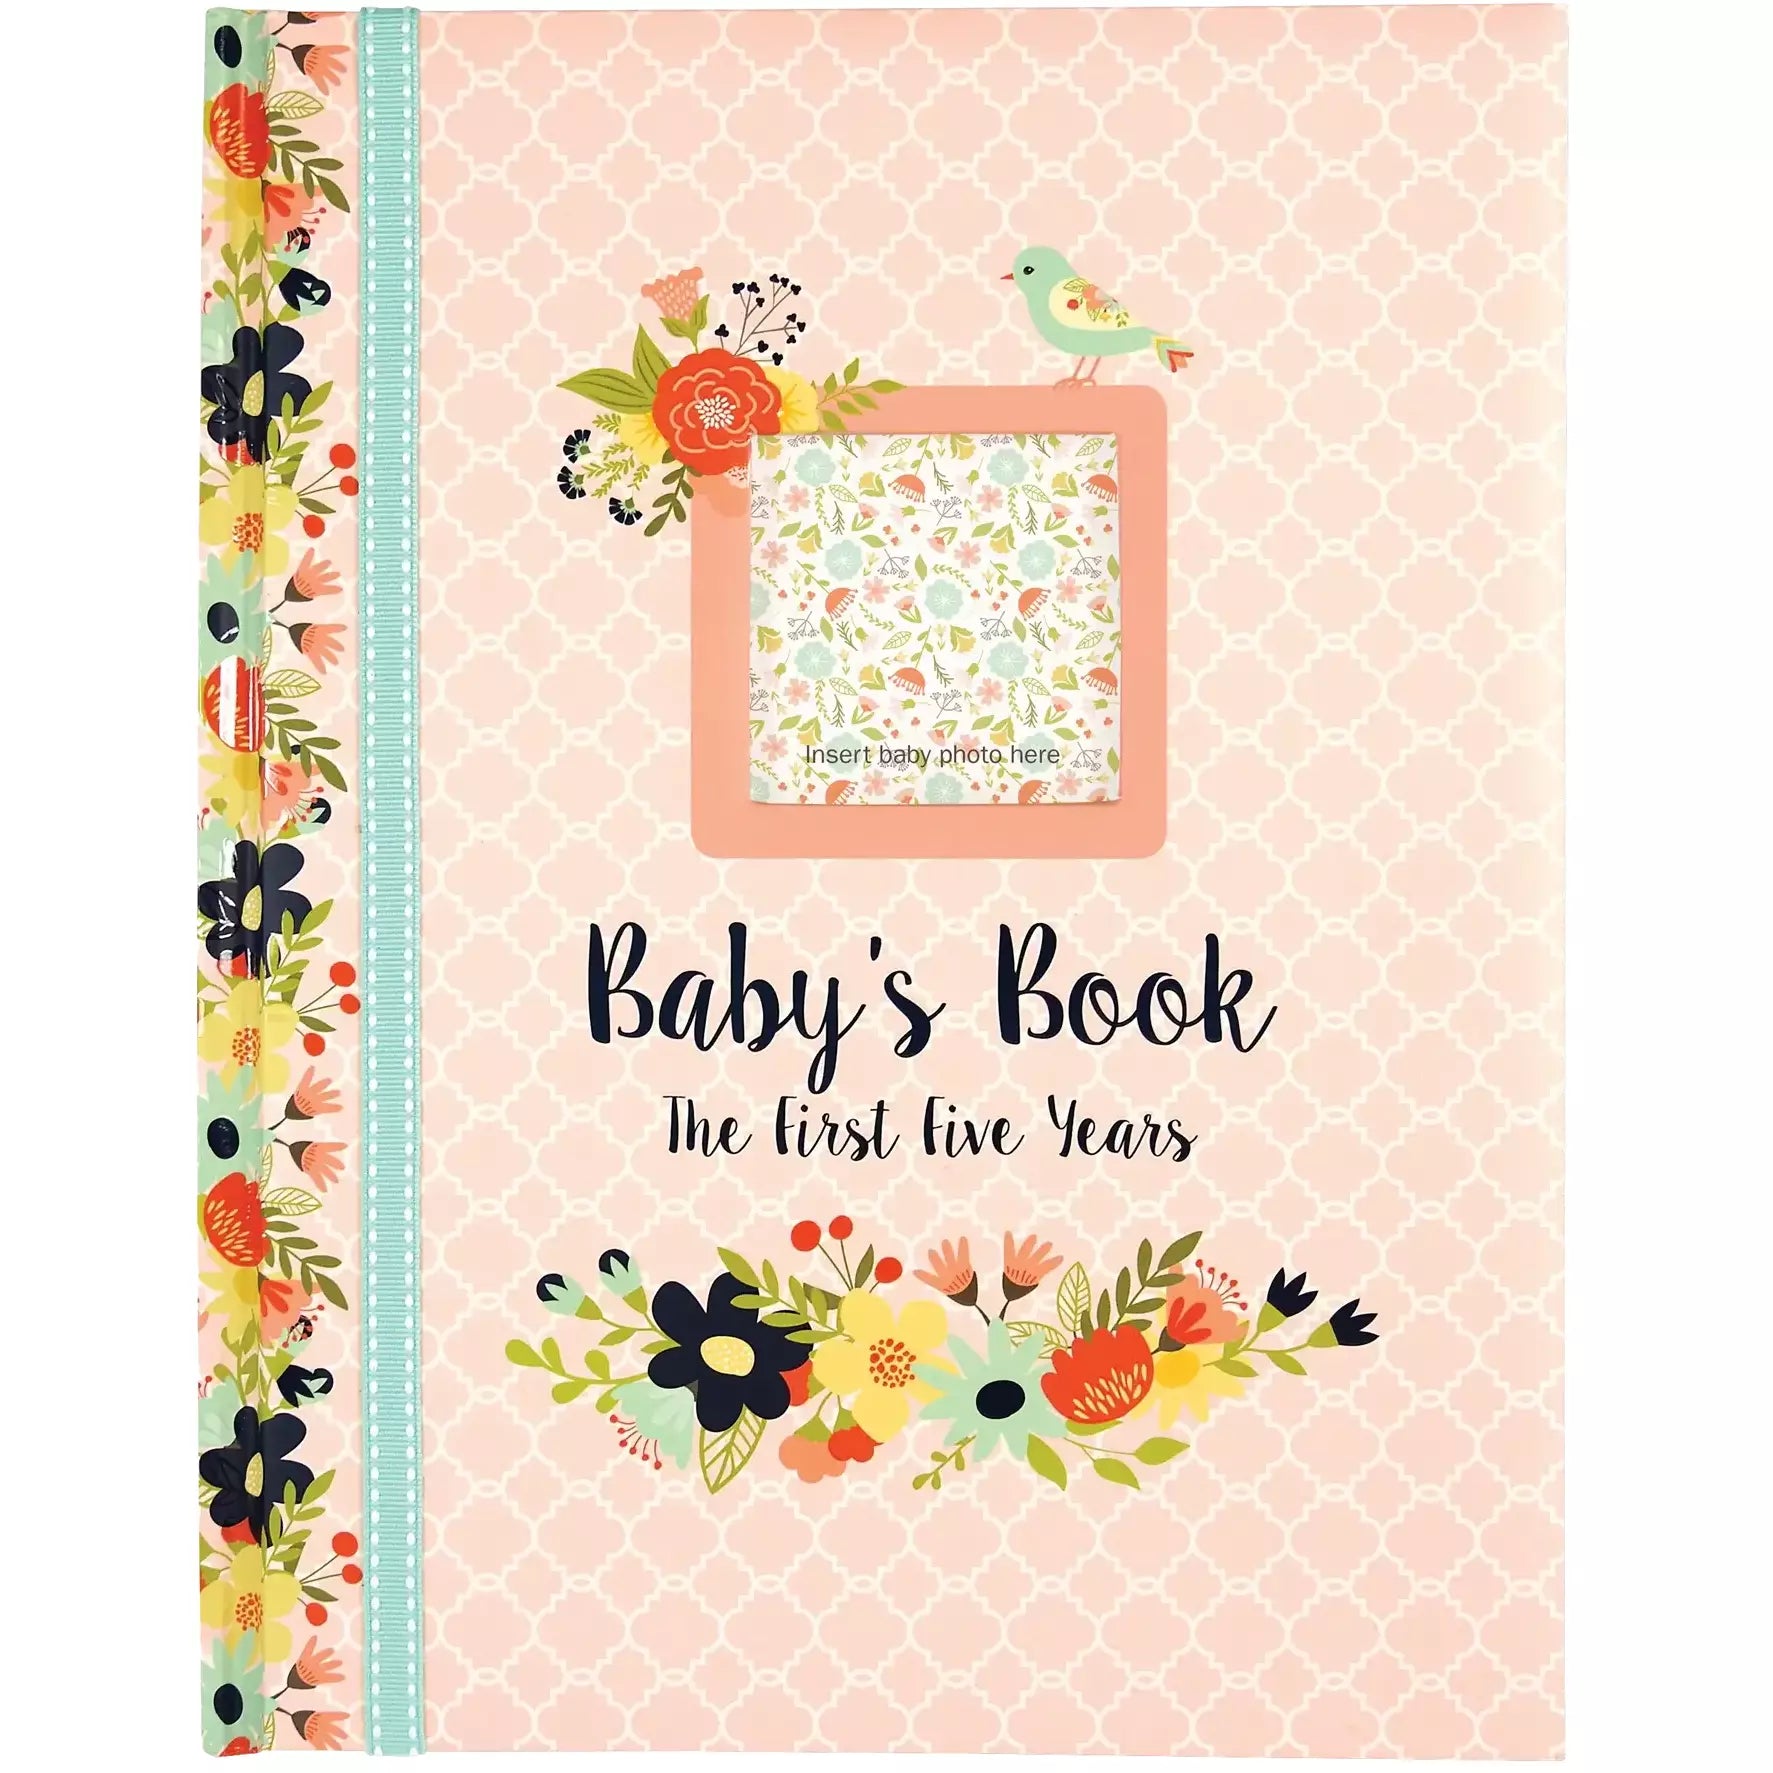 Baby's Book: The First Five Years (Floral) - Zinnias Gift Boutique